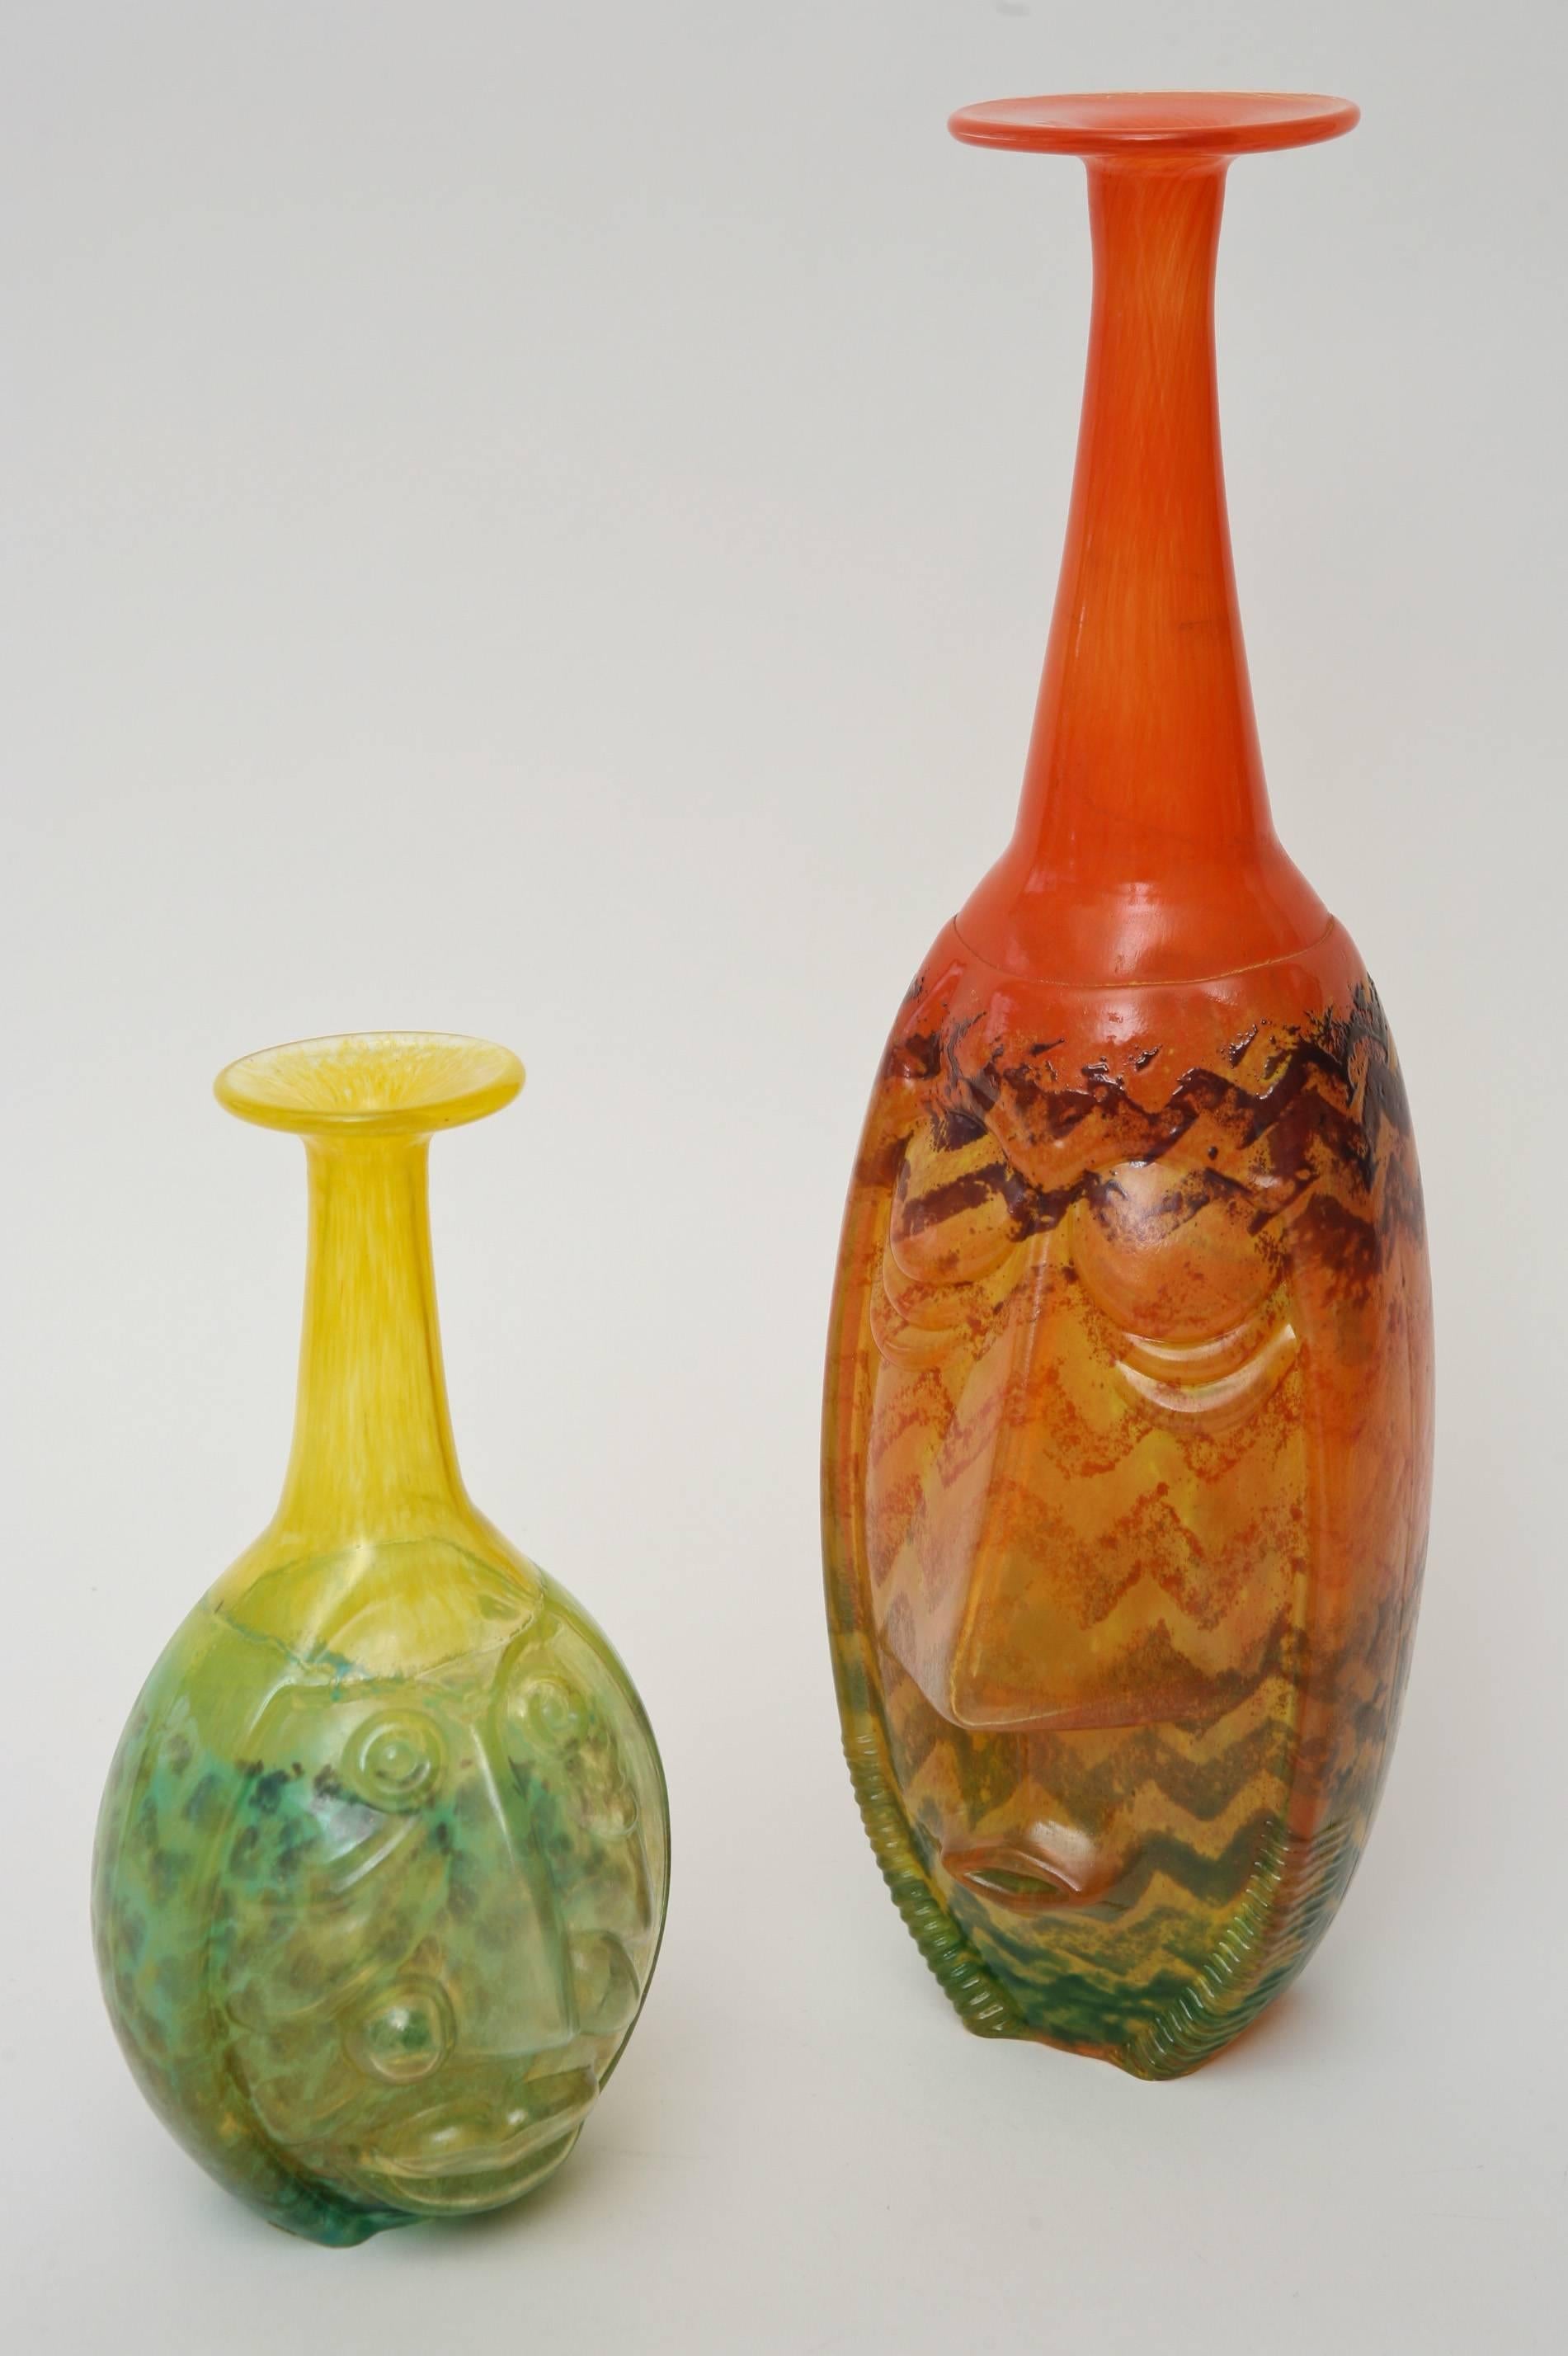 These absolutely stunning pair of signed hand blown glass vessels/sculptures by the renowned glass wizard and glass artist: Kjell Engman eludes carnival, masks and celebration. In light of what has just transpired from the glorious olympics that